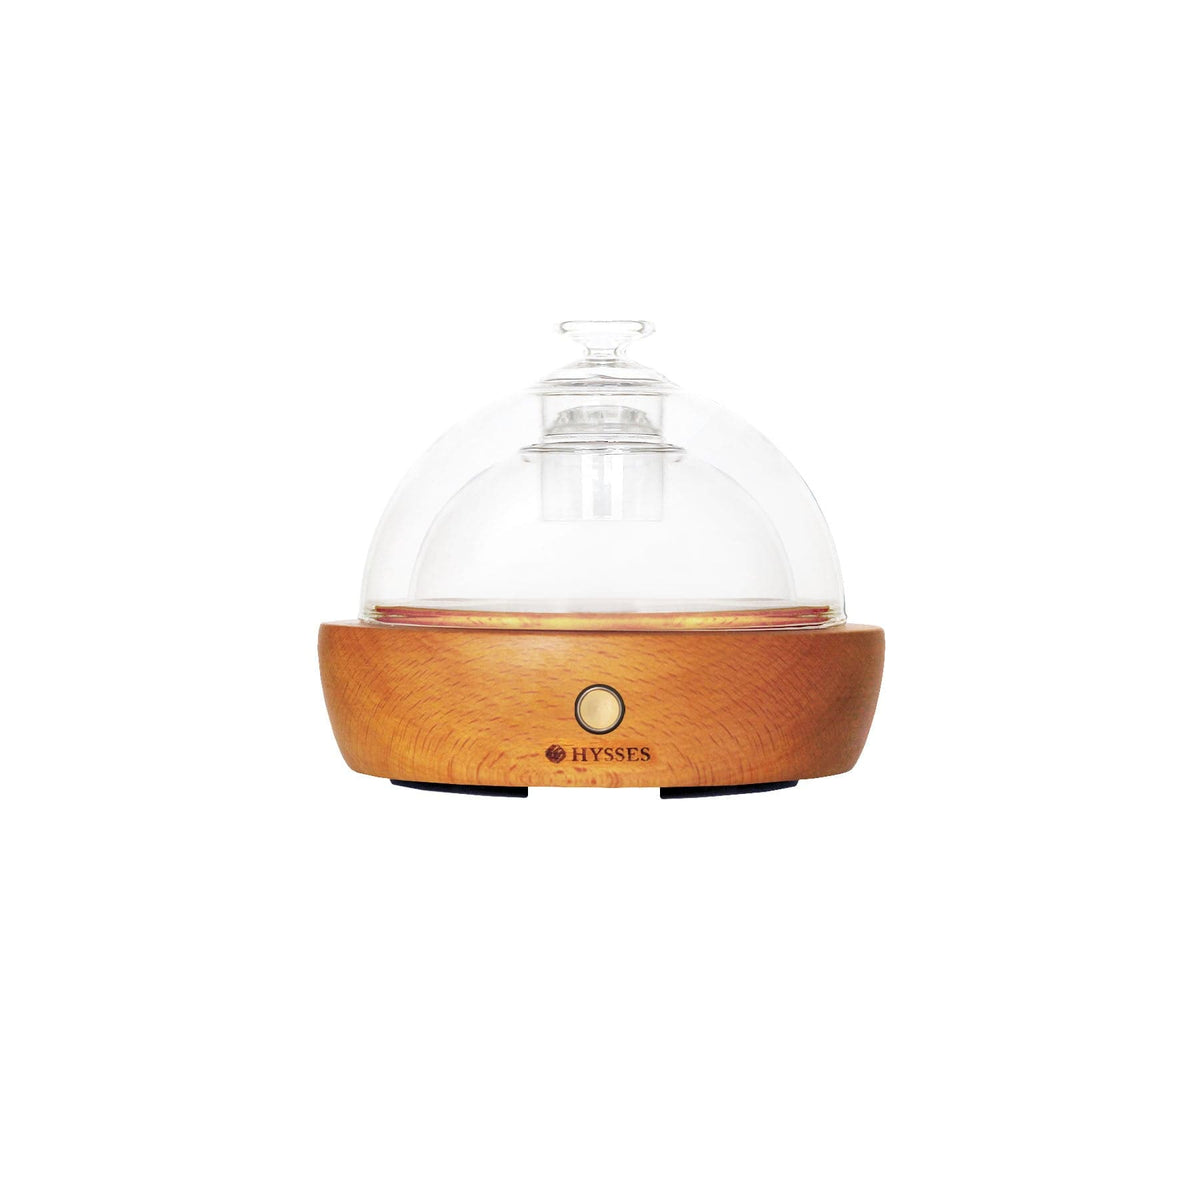 Hysses Burners/Devices Cedar Ultrasonic Water Mist, Dome